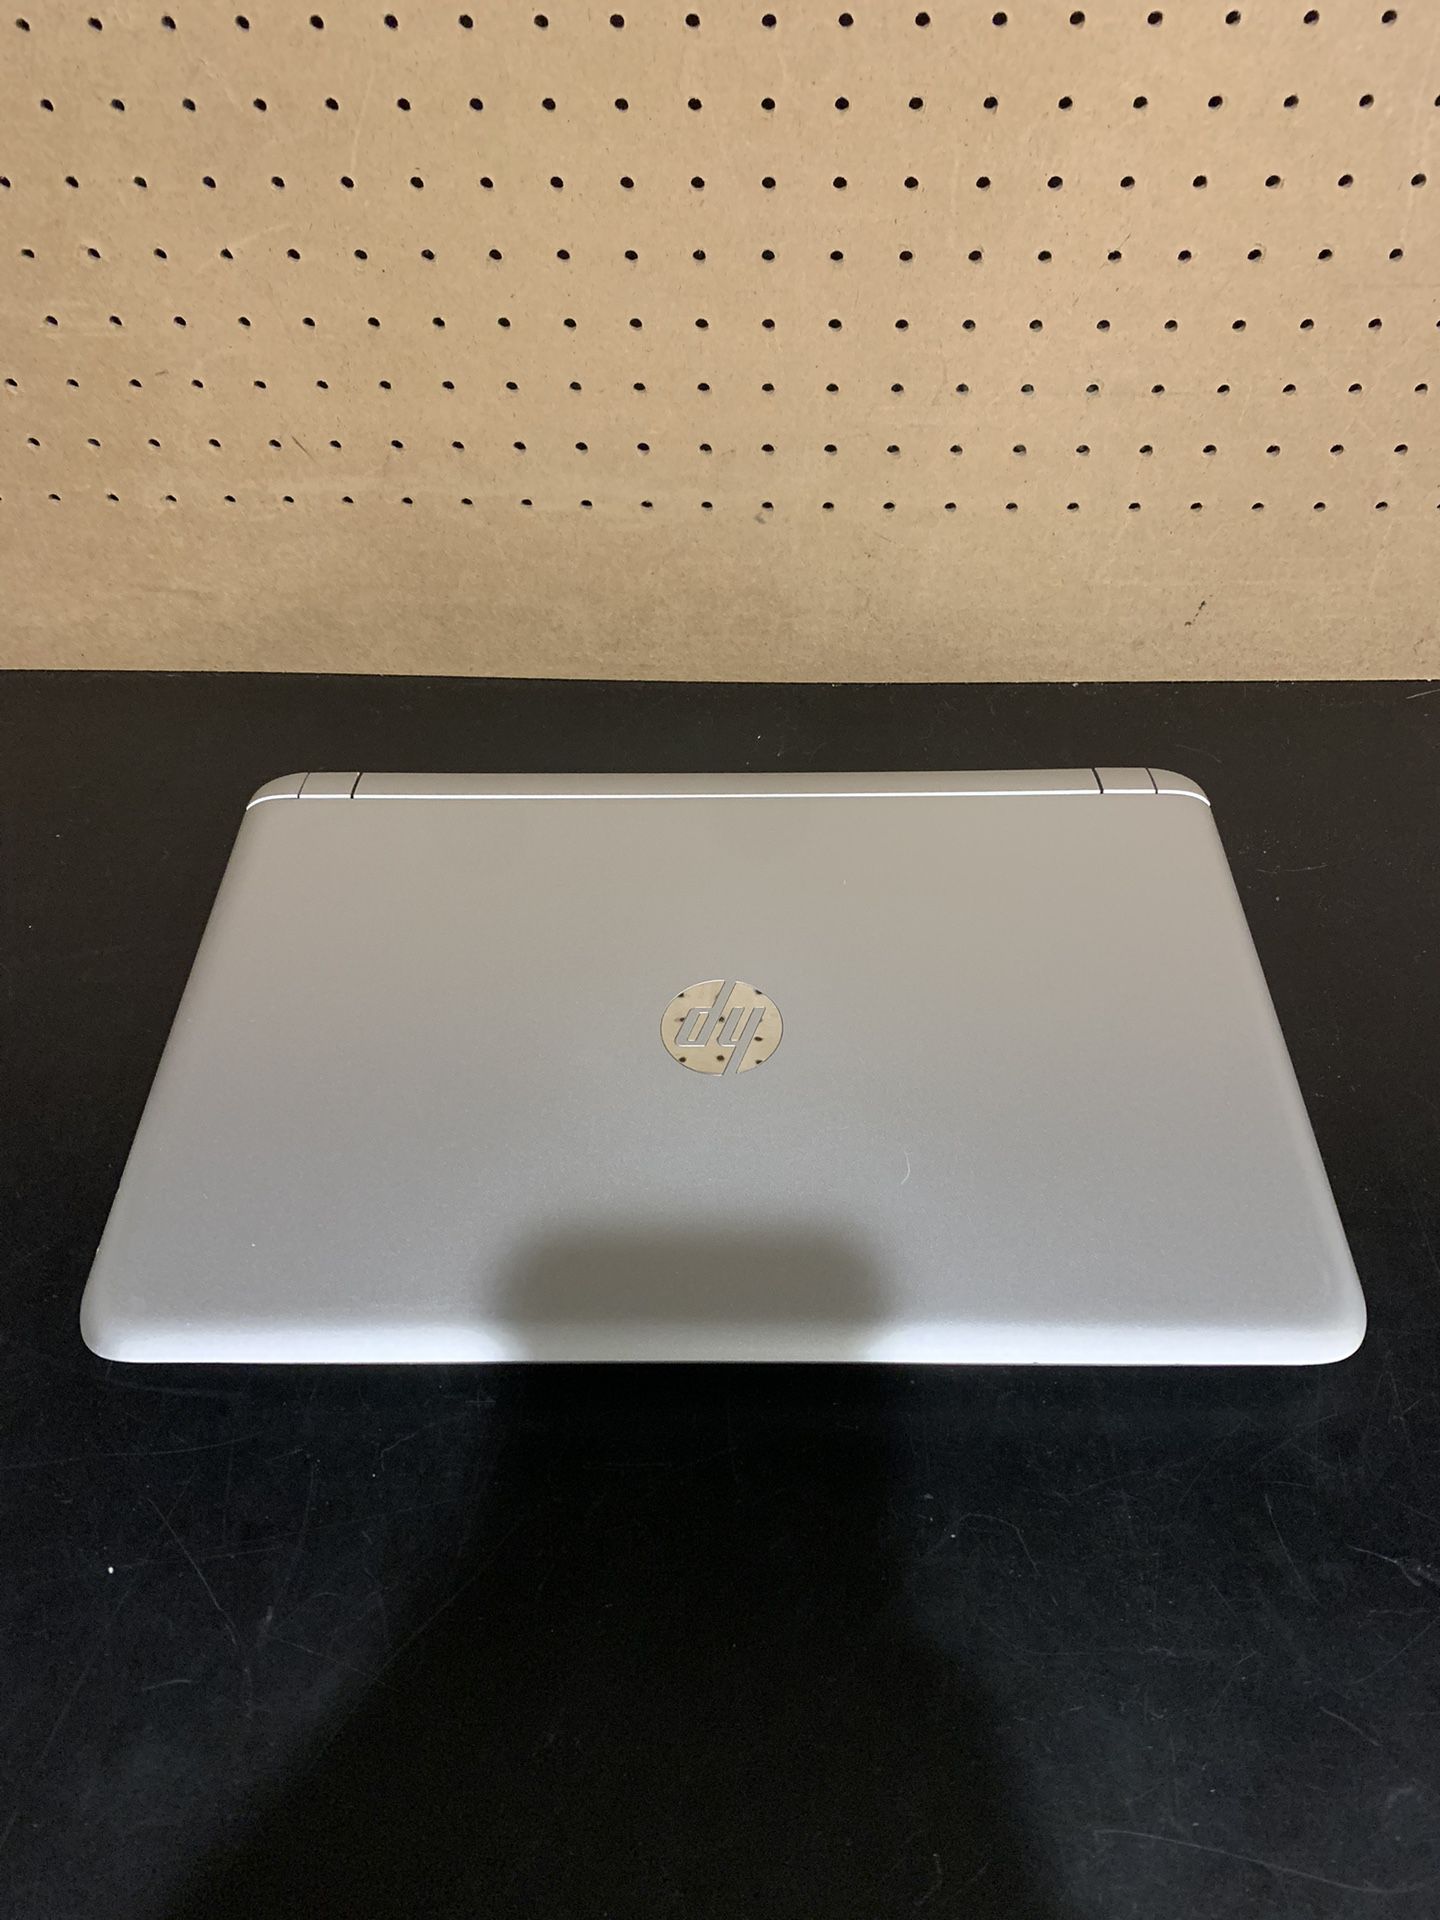 Gray Hp With 16 Gb Ram, 1GB Graphics, And SSD